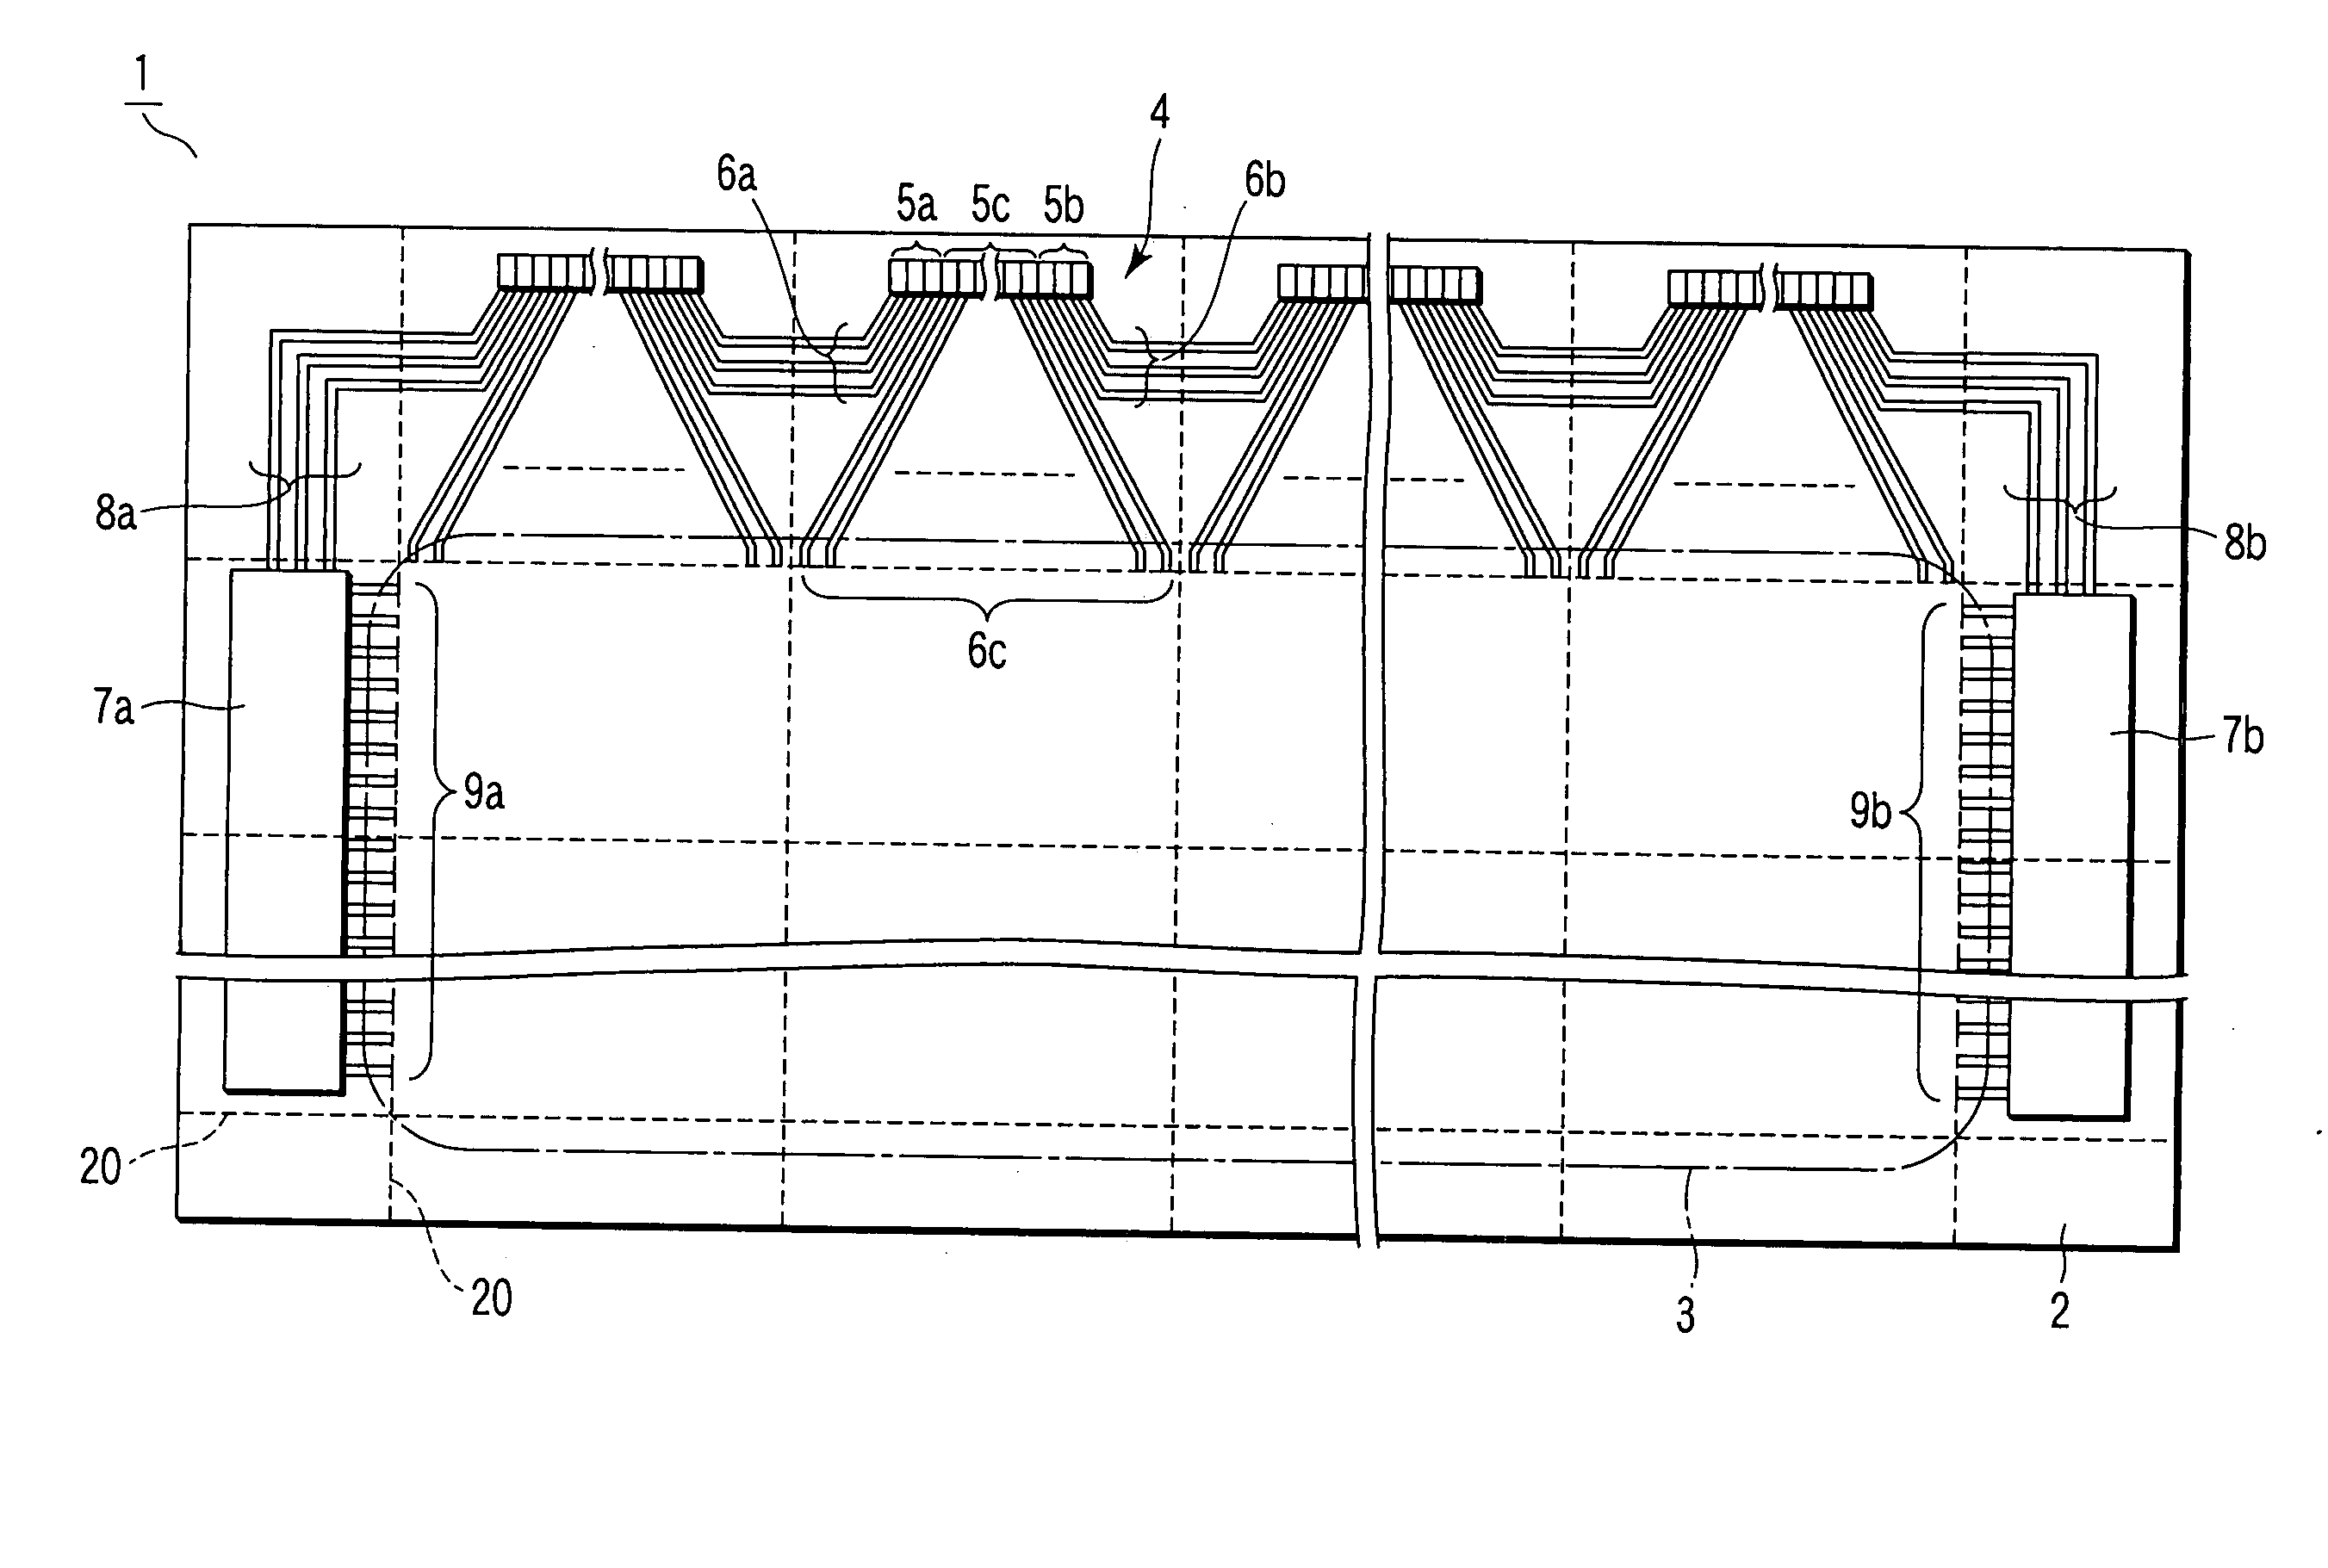 Display, wiring board, and method of manufacturing the same